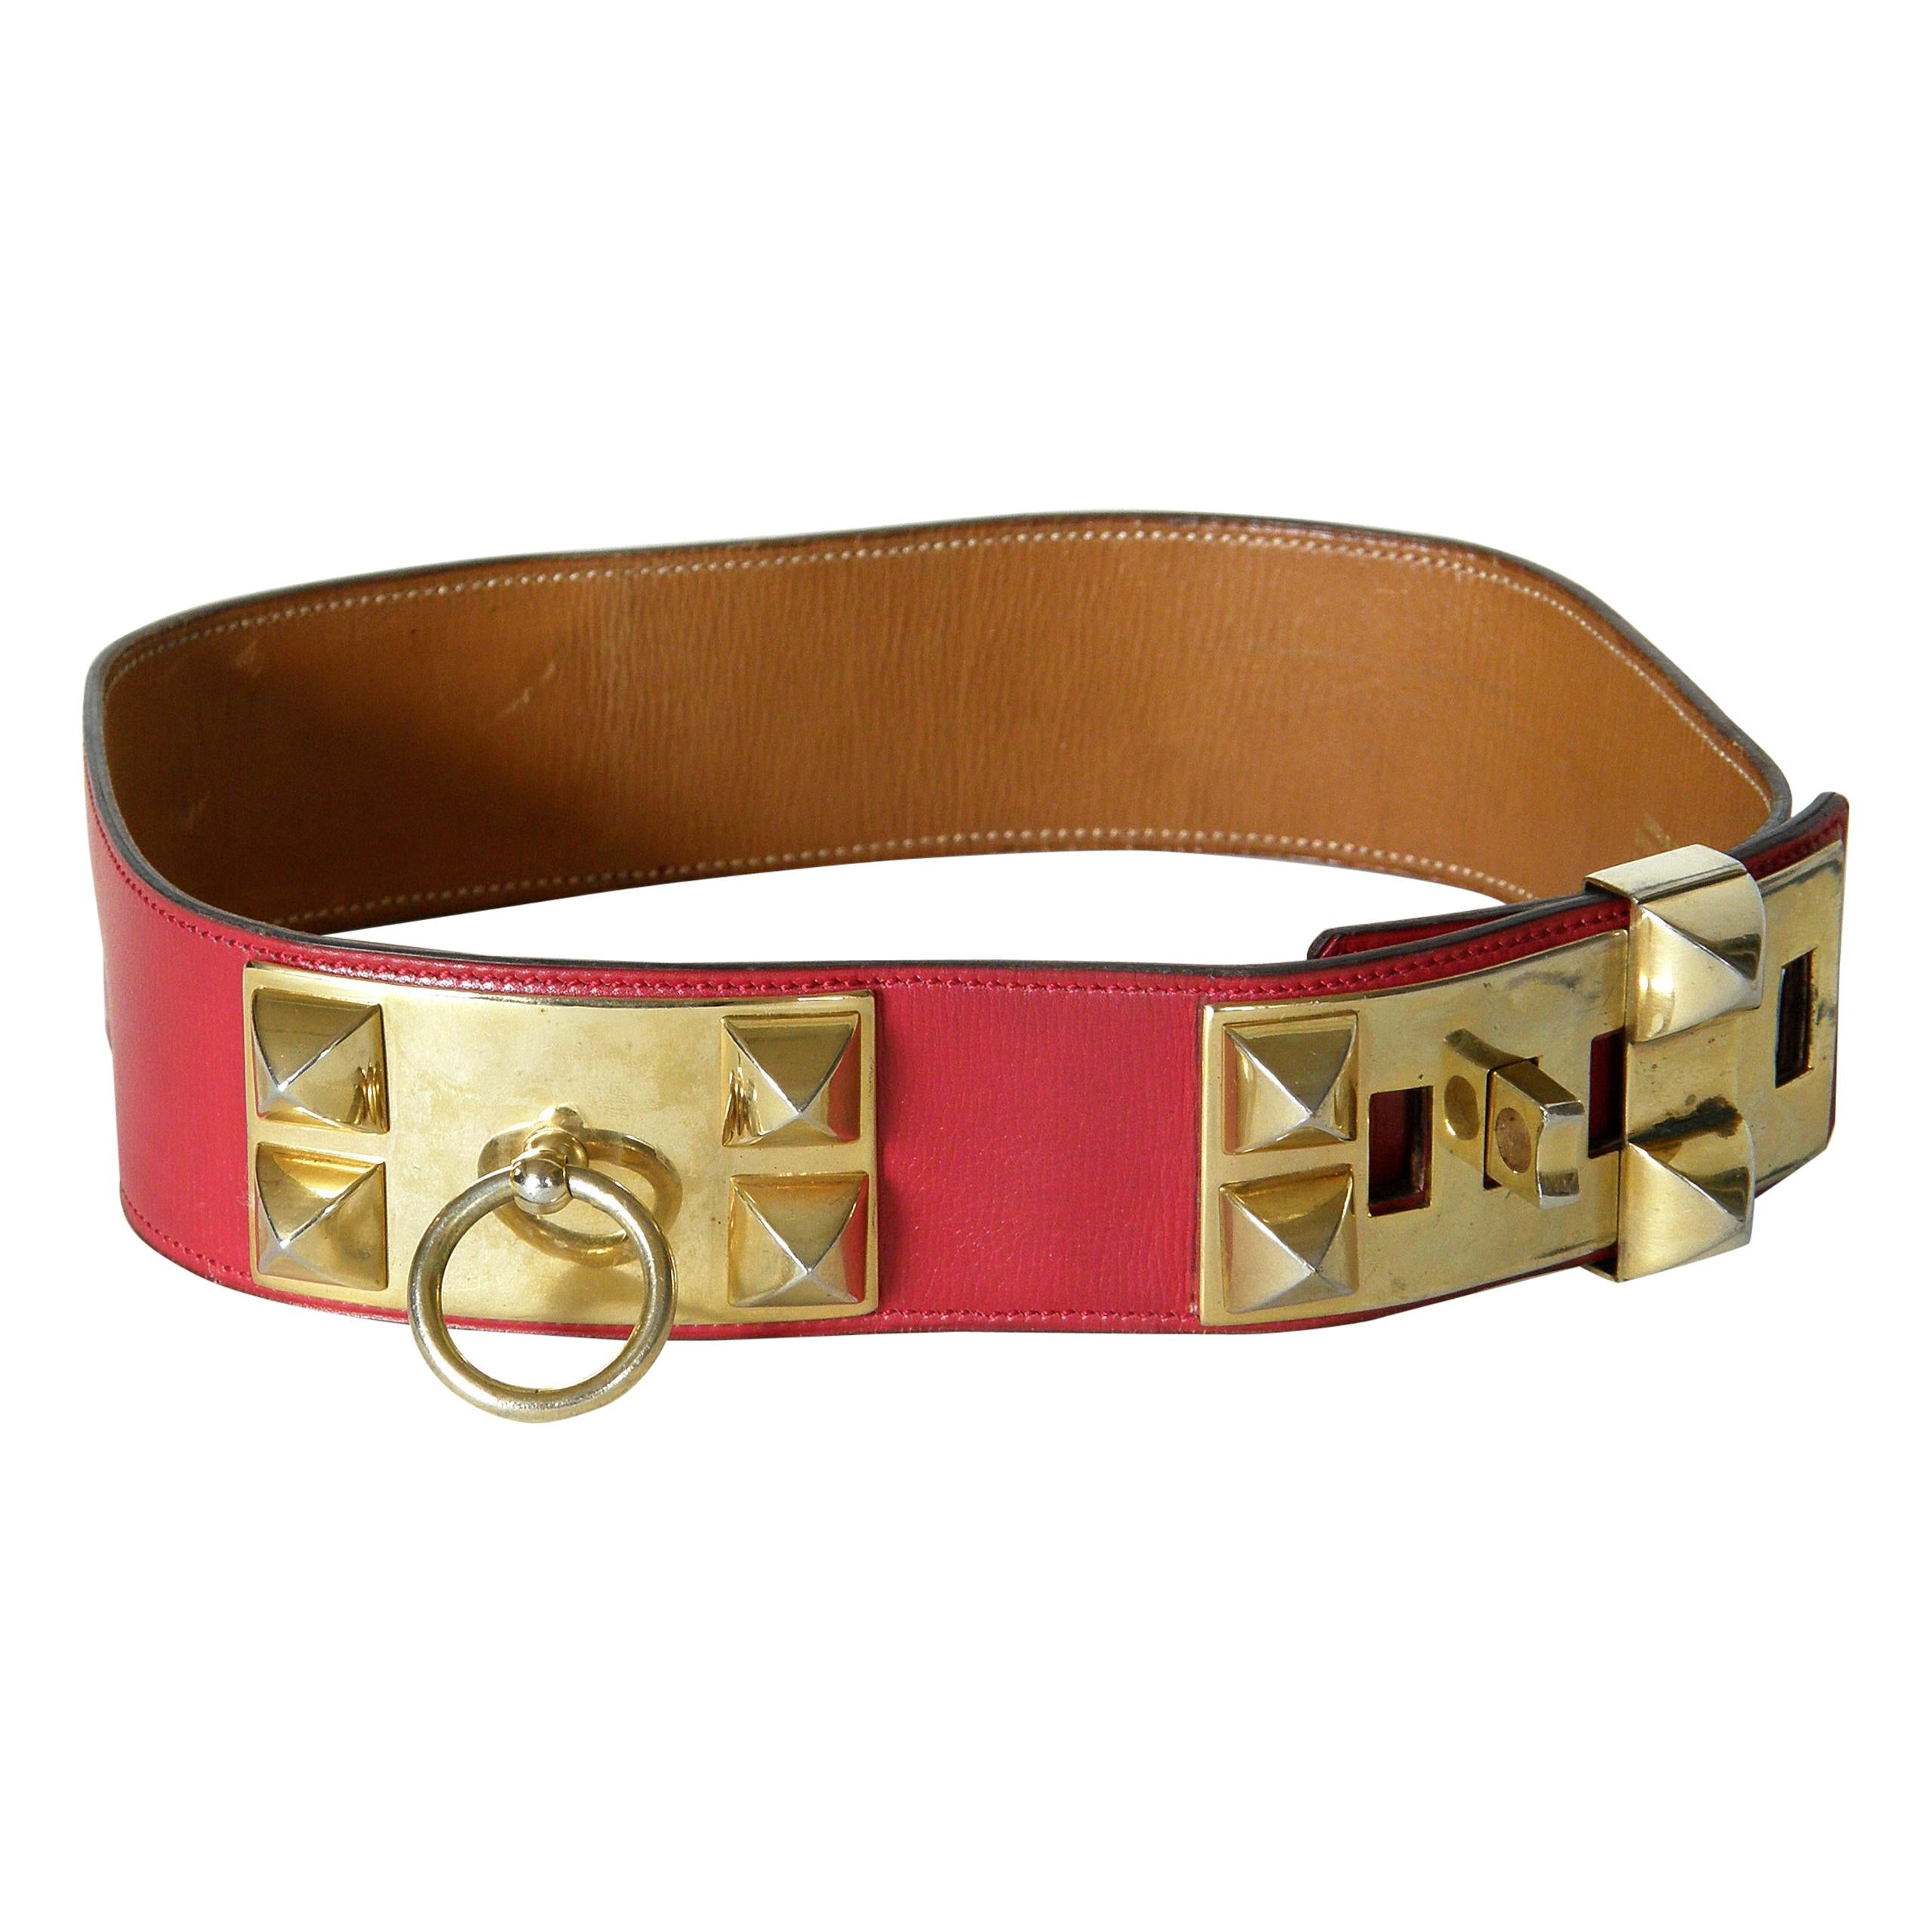 Early Hermès Collier de Chien Belt Adjustable Red Leather CDC with Gold Hardware